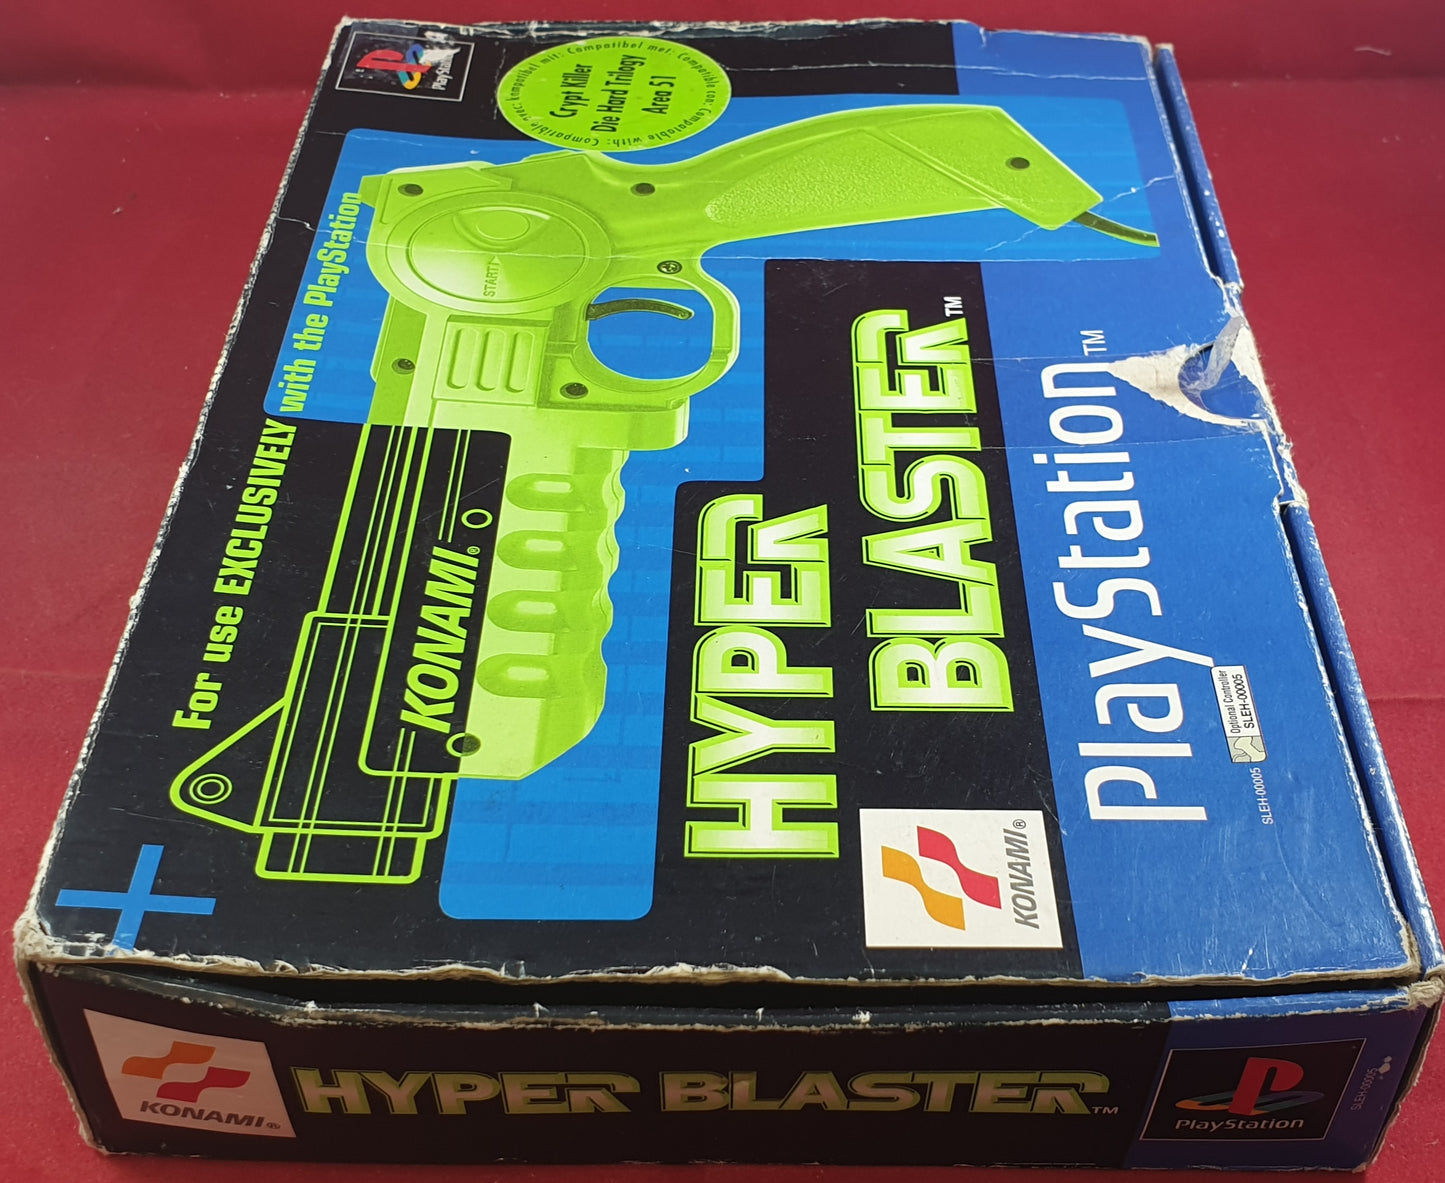 Konami Hyper Blaster Sony Playstation 1 (PS1) RARE Accessory with Die Hard Trilogy